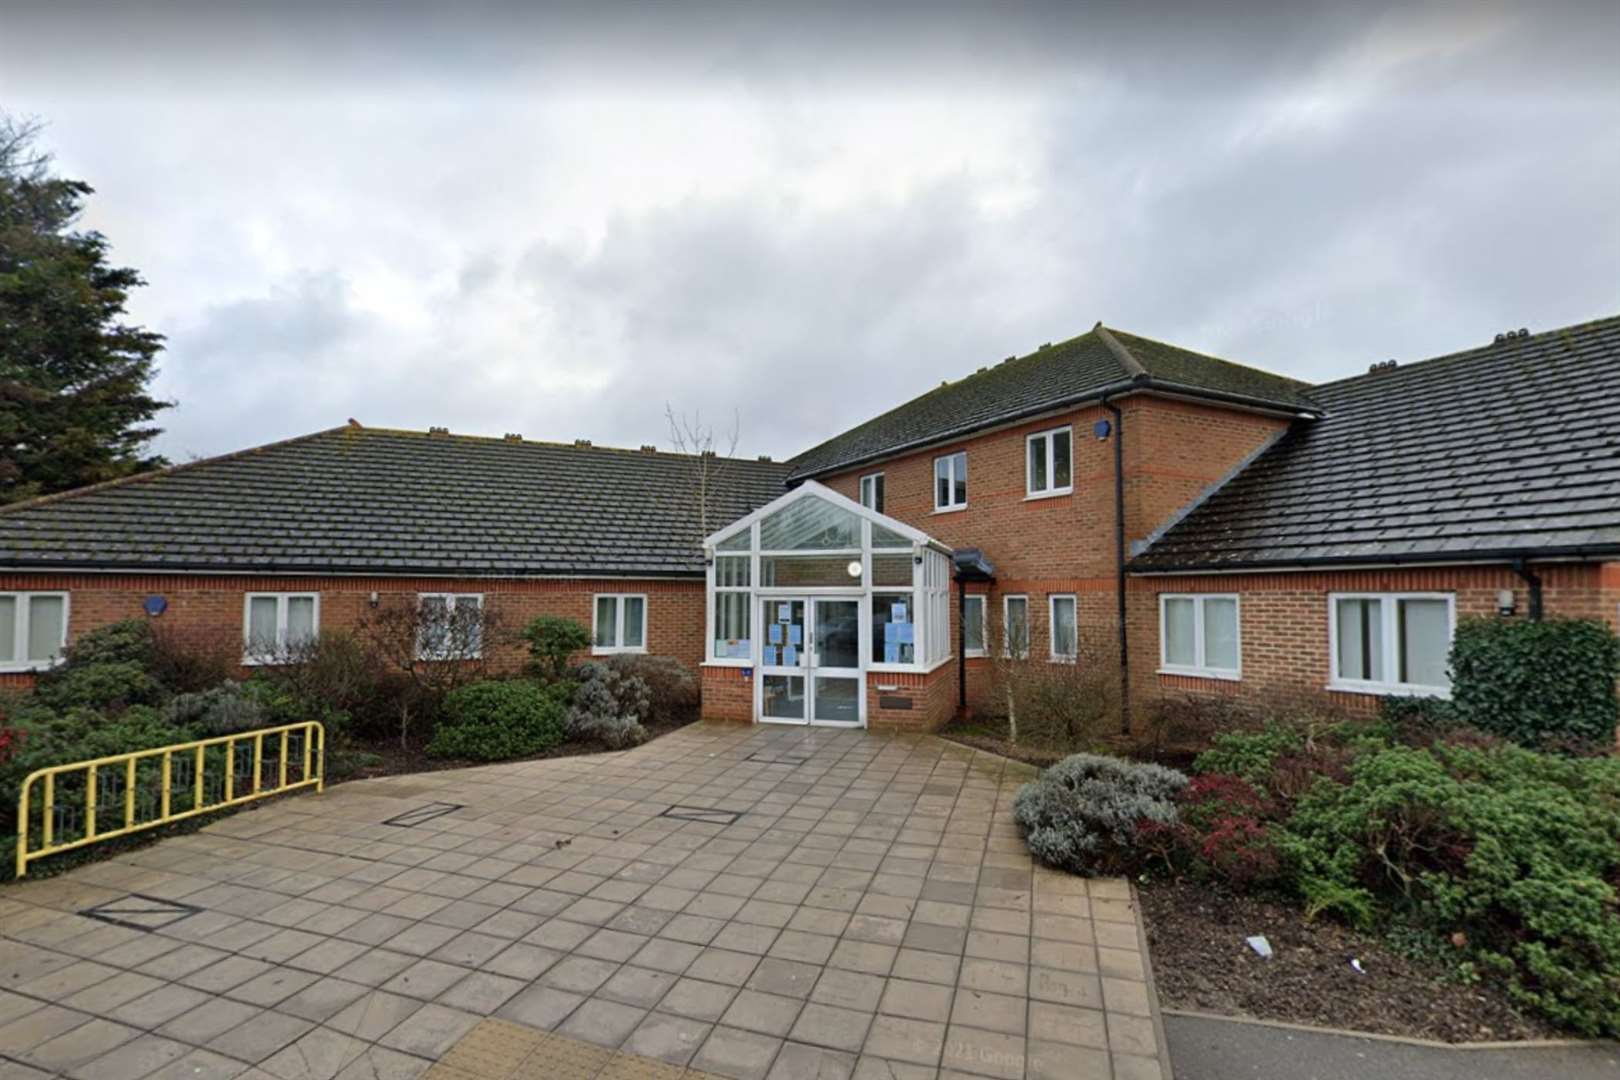 Sydenham House Medical Centre and Hollington Surgery have planned to merge. Picture: Google Maps